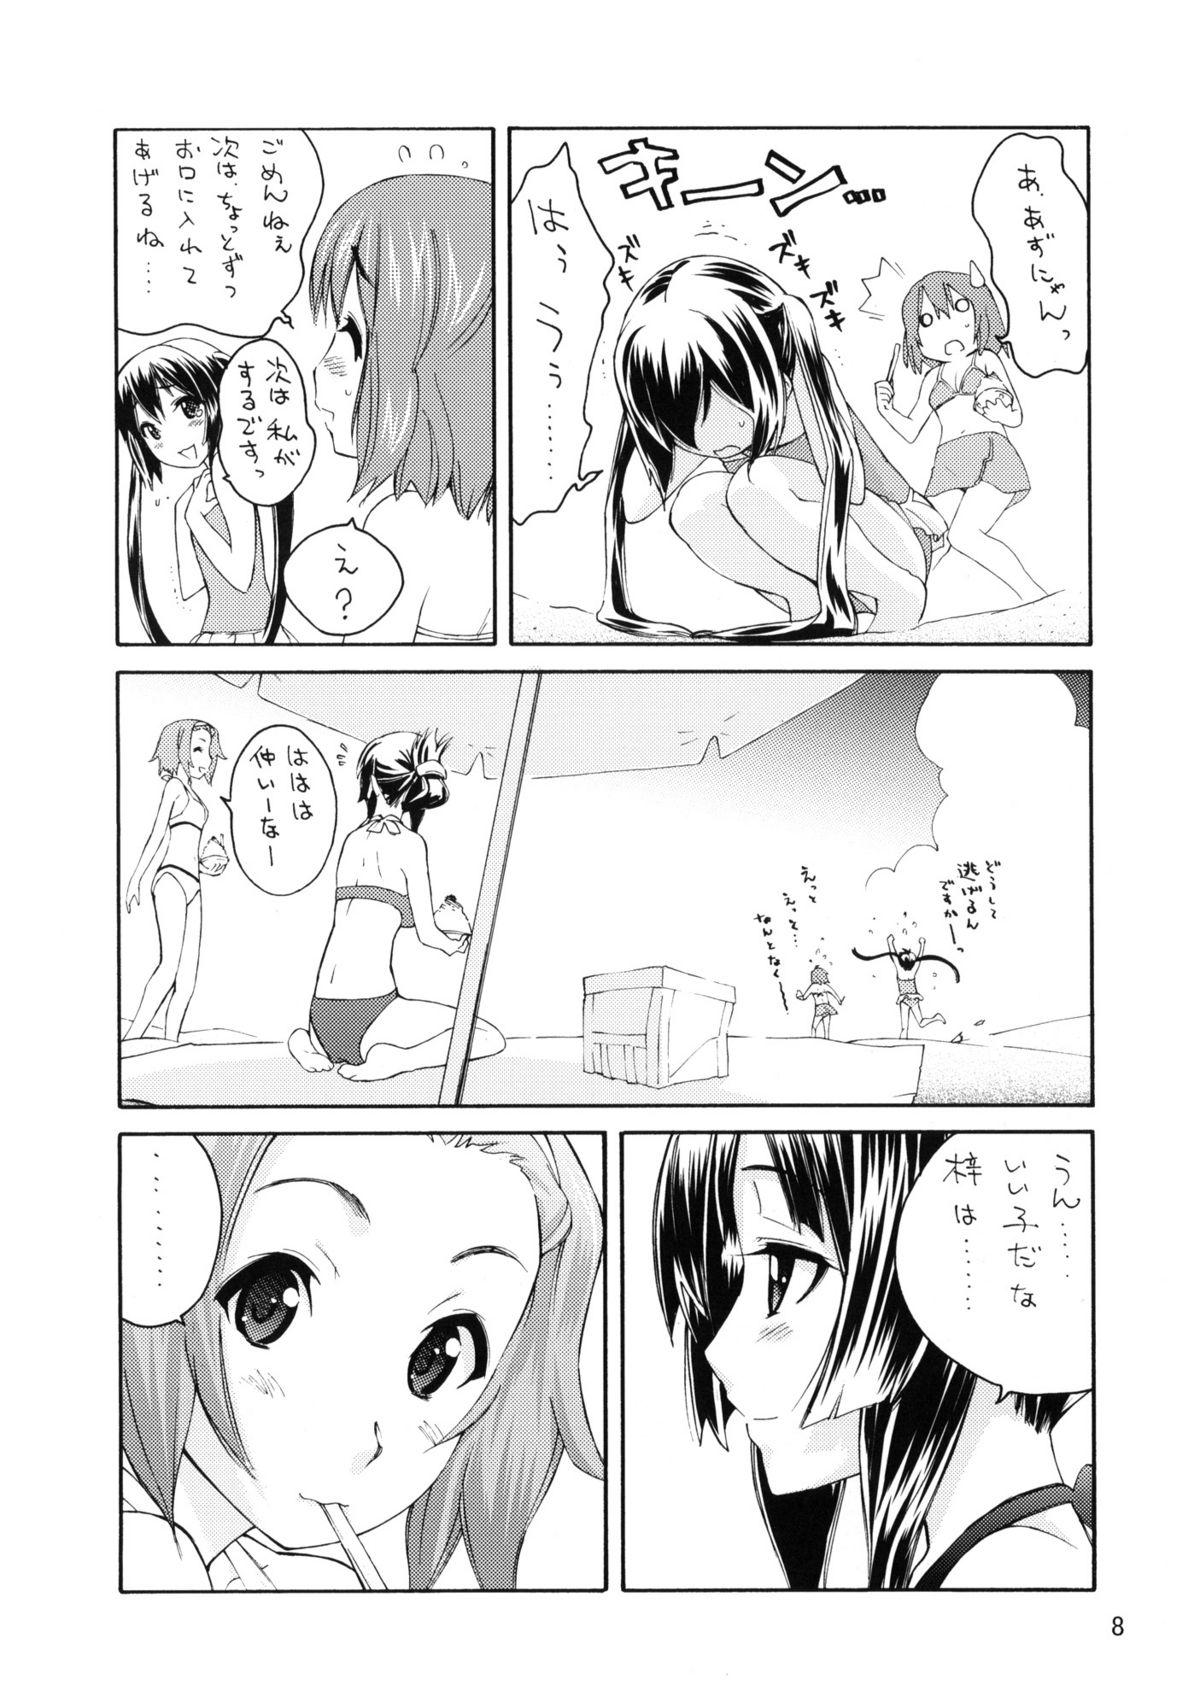 Nasty BUTTERFLIES - K-on Oral Sex Porn - Page 7